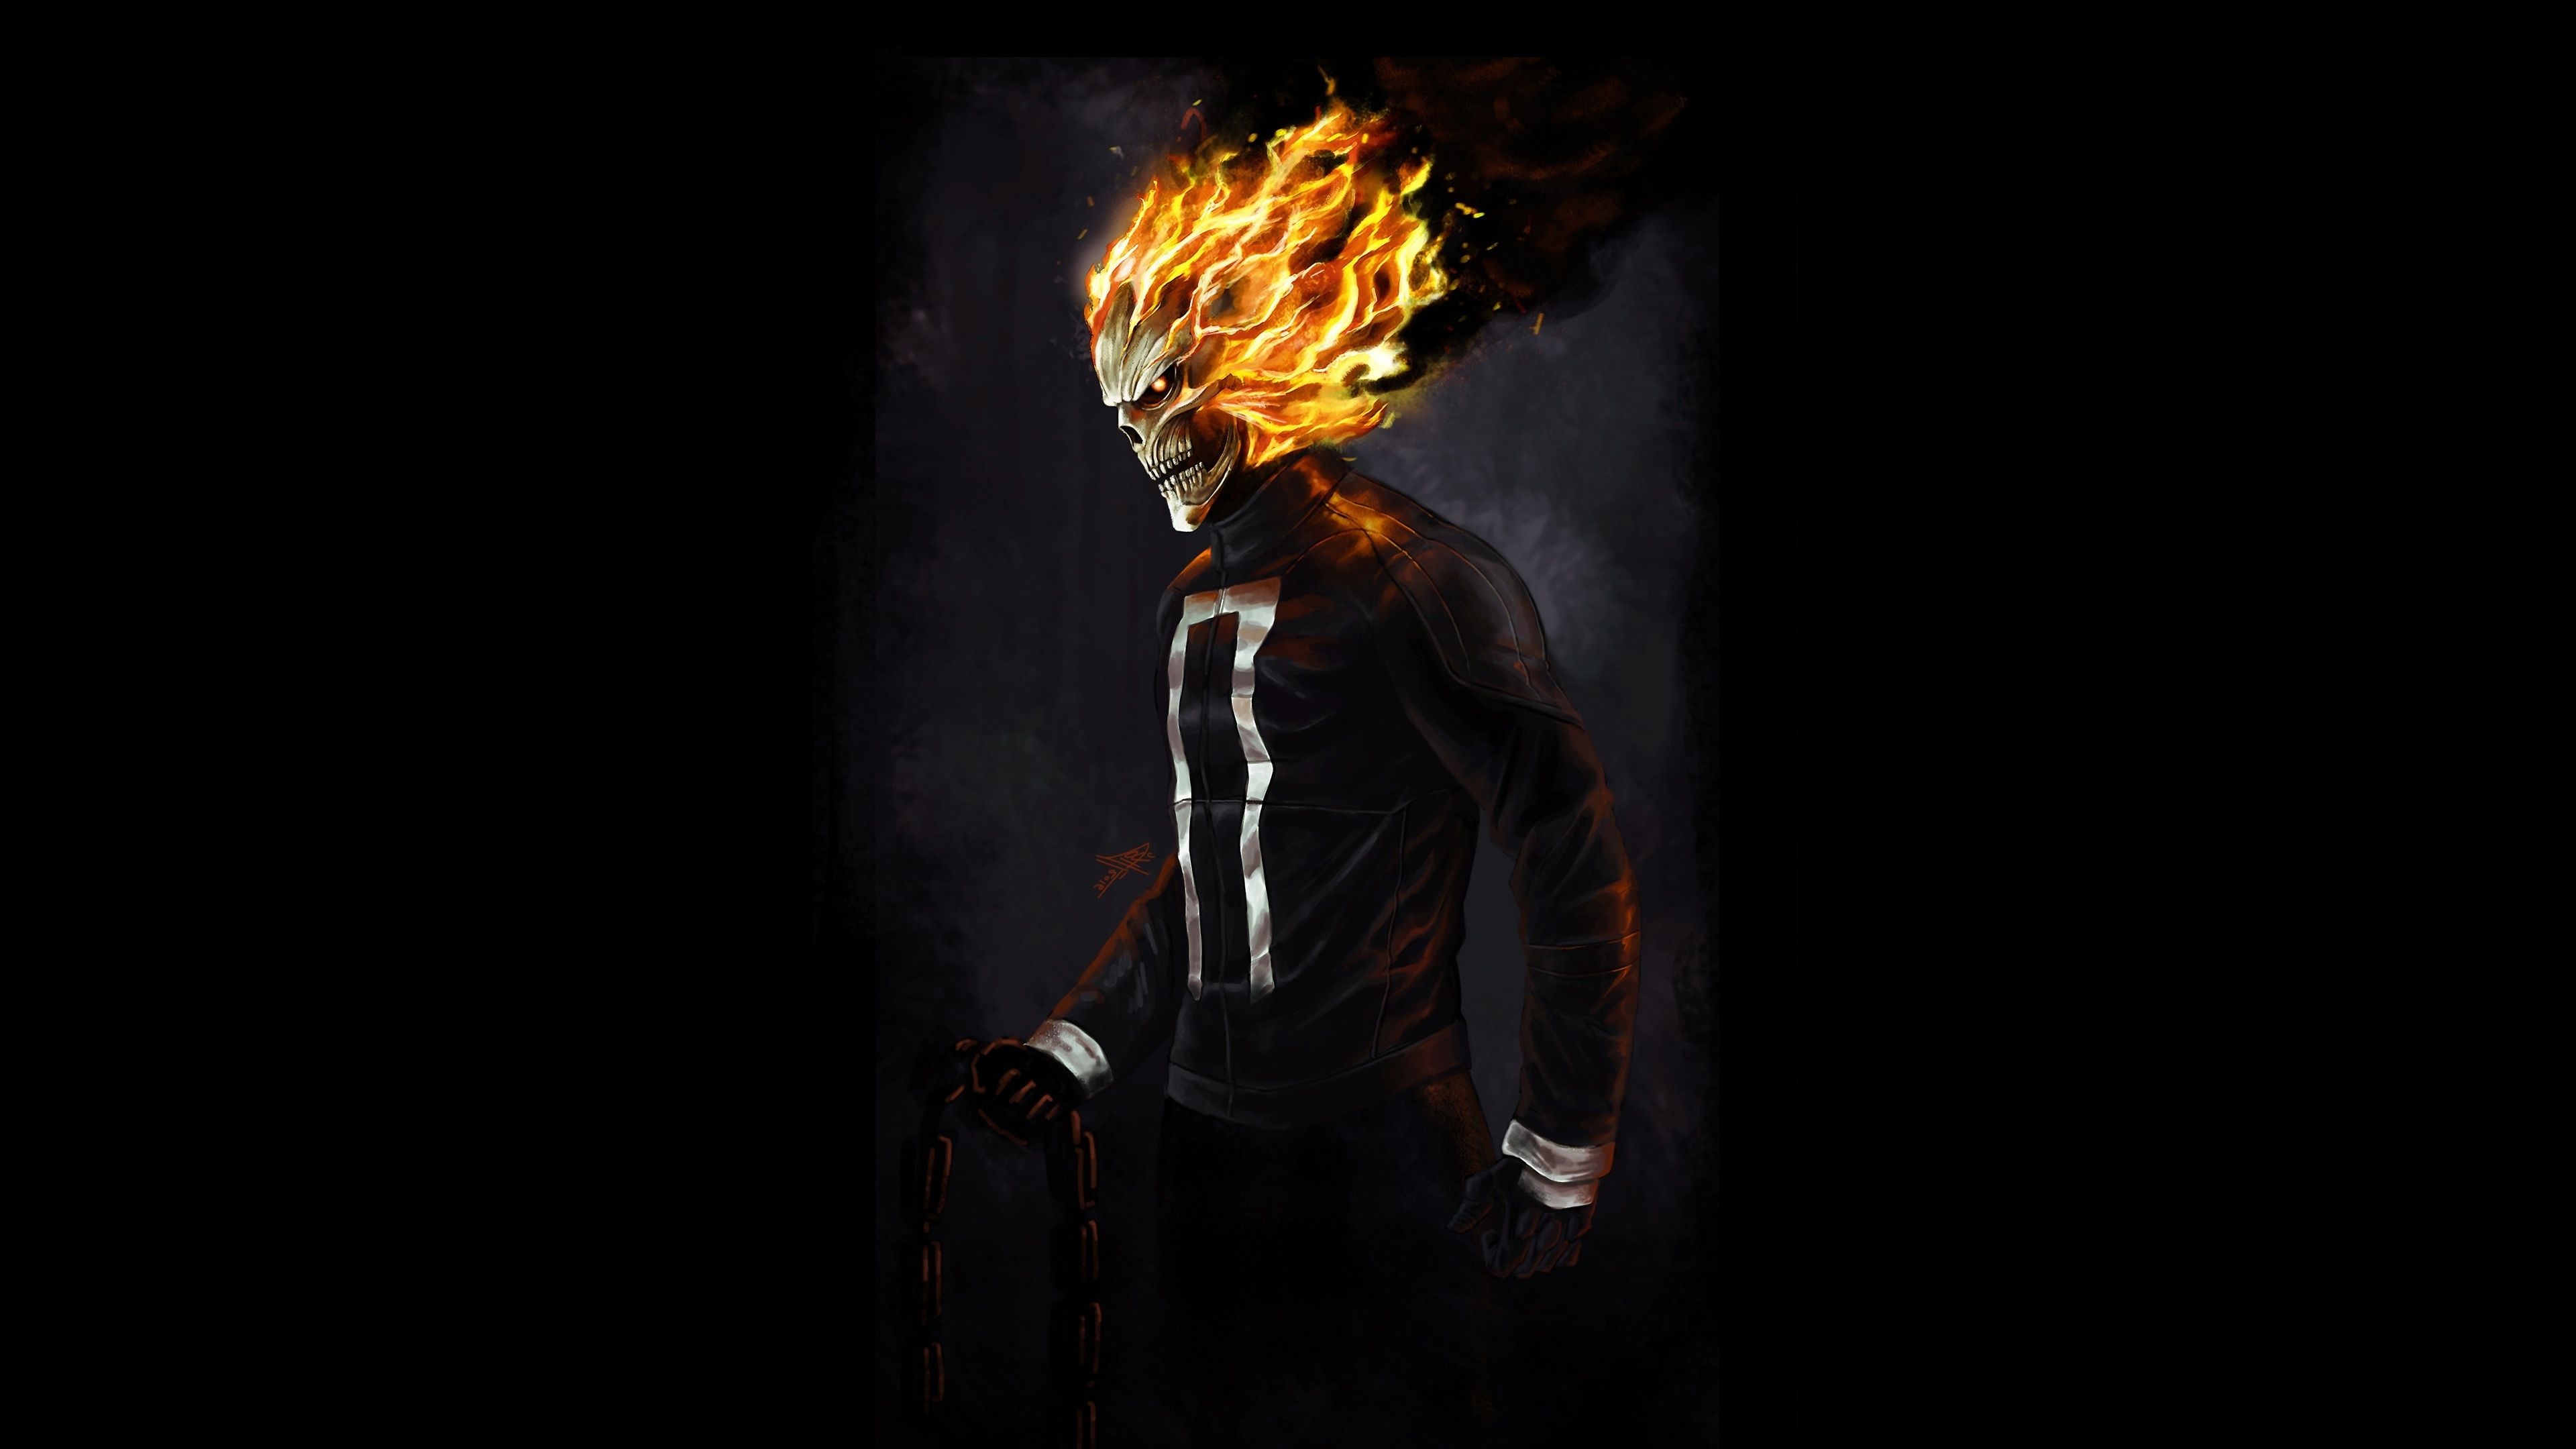 Ghost Rider Wallpaper 4k For Mobile Download